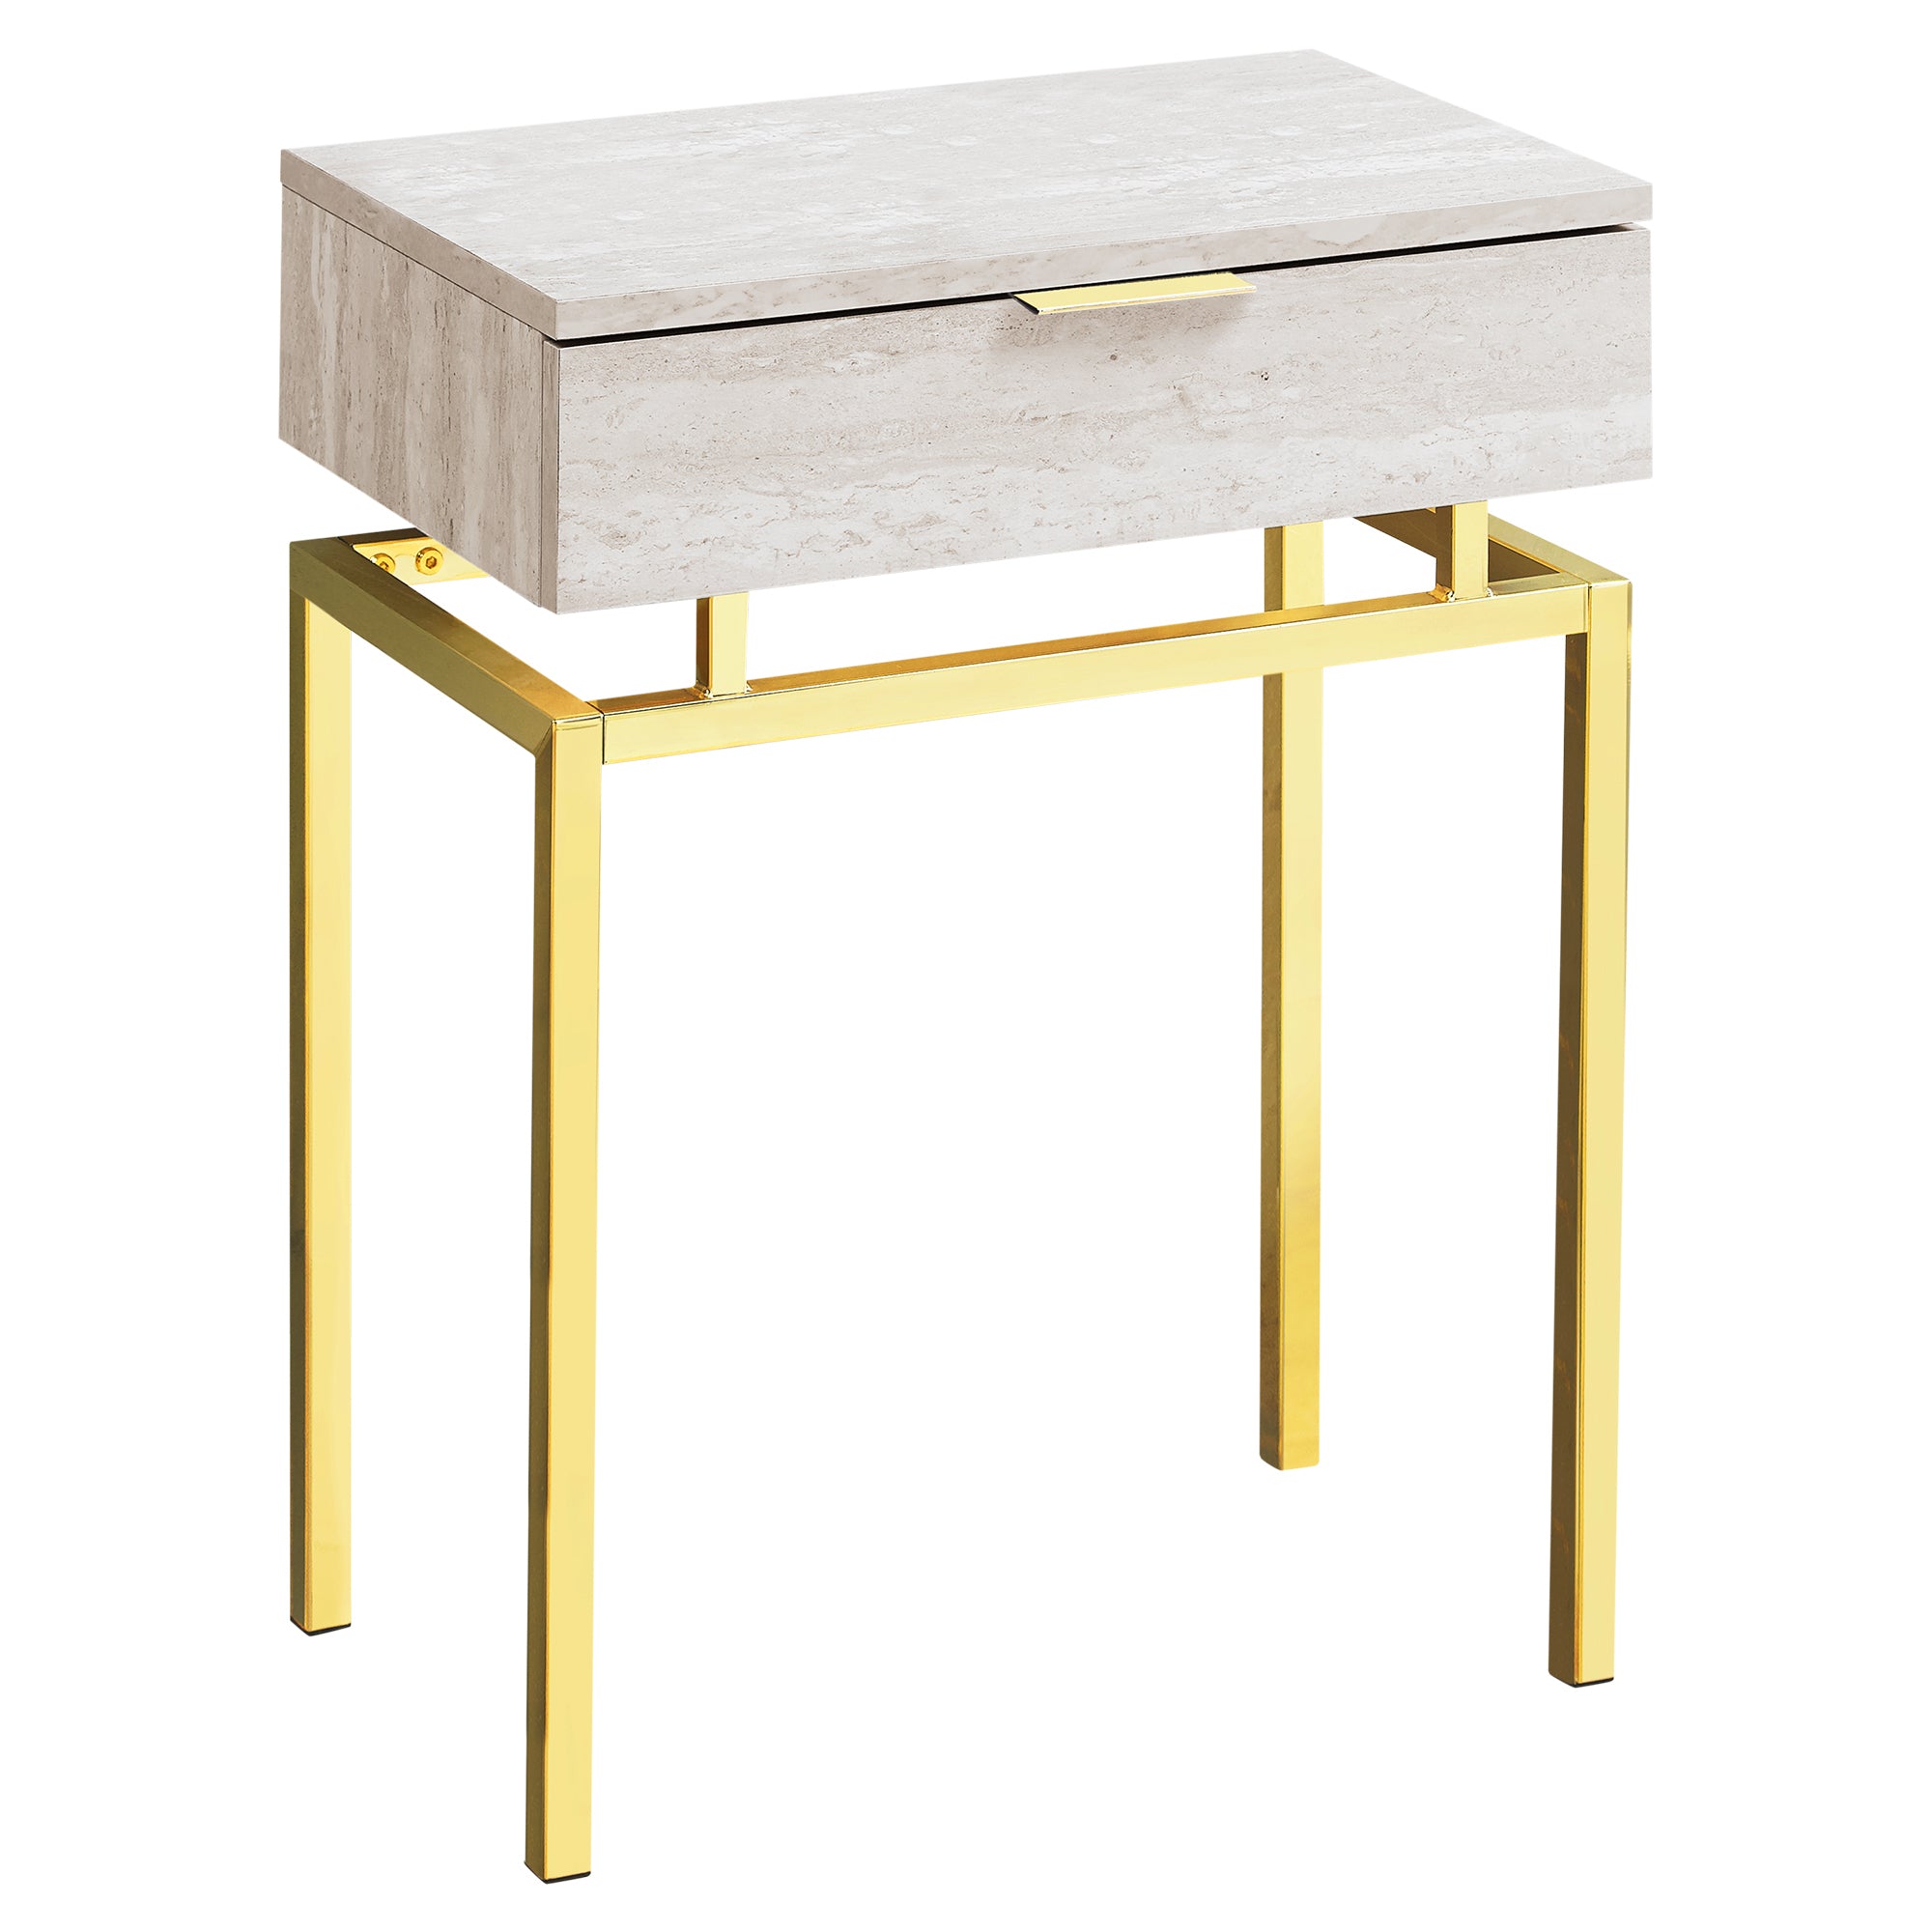 MN-763463    Accent Table, Side, End, Nightstand, Lamp, Living Room, Bedroom, Metal Legs, Laminate, Beige Marble, Gold, Contemporary, Modern